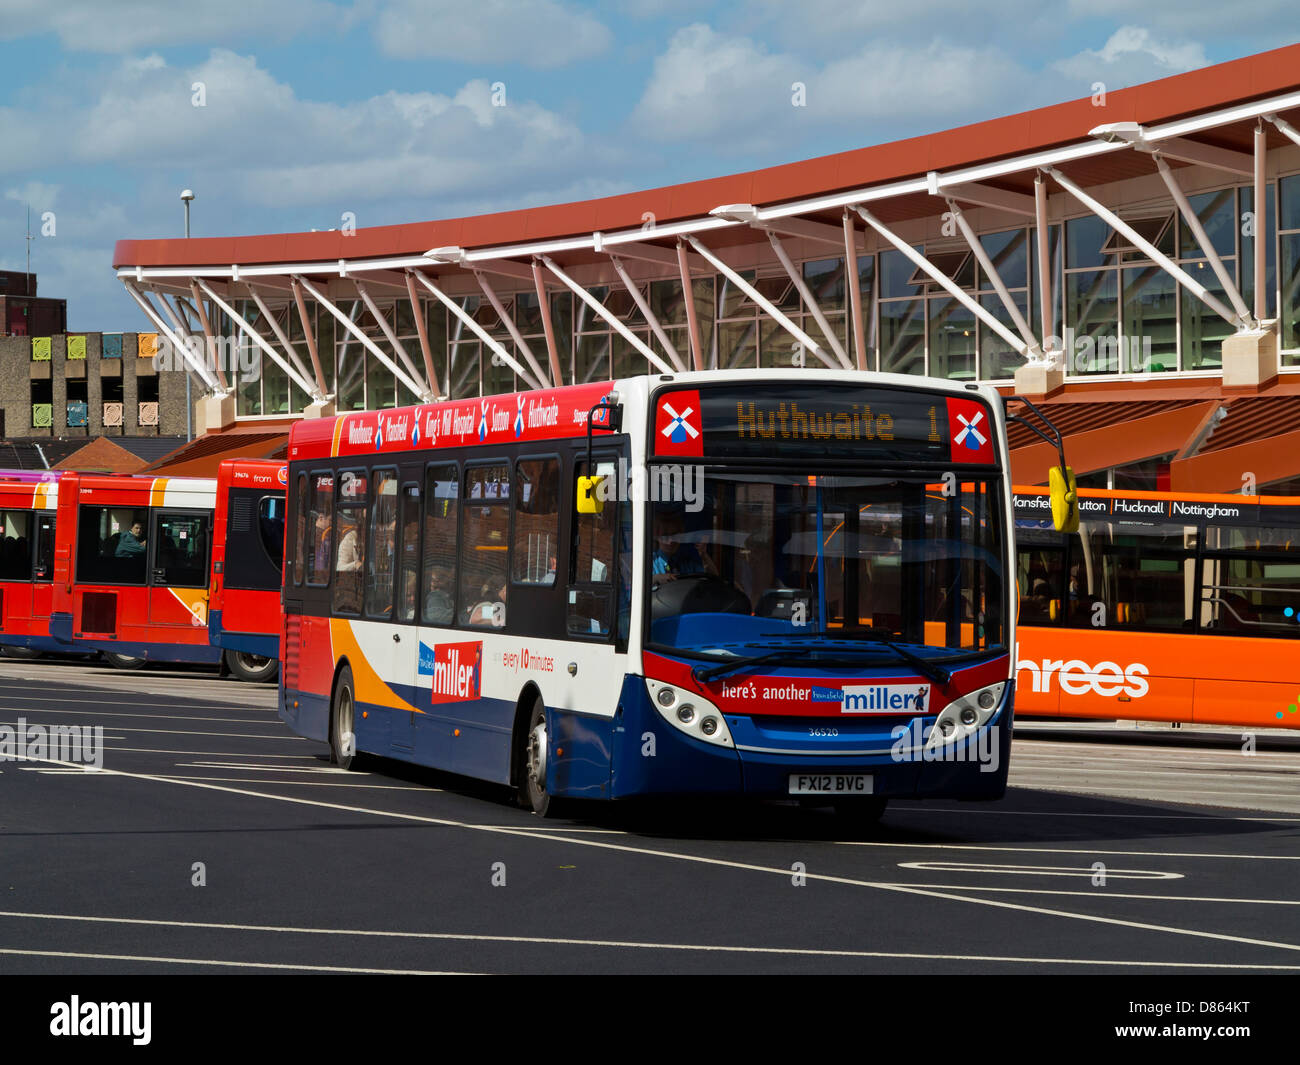 The new bus station at Mansfield Nottinghamshire England UK which ...